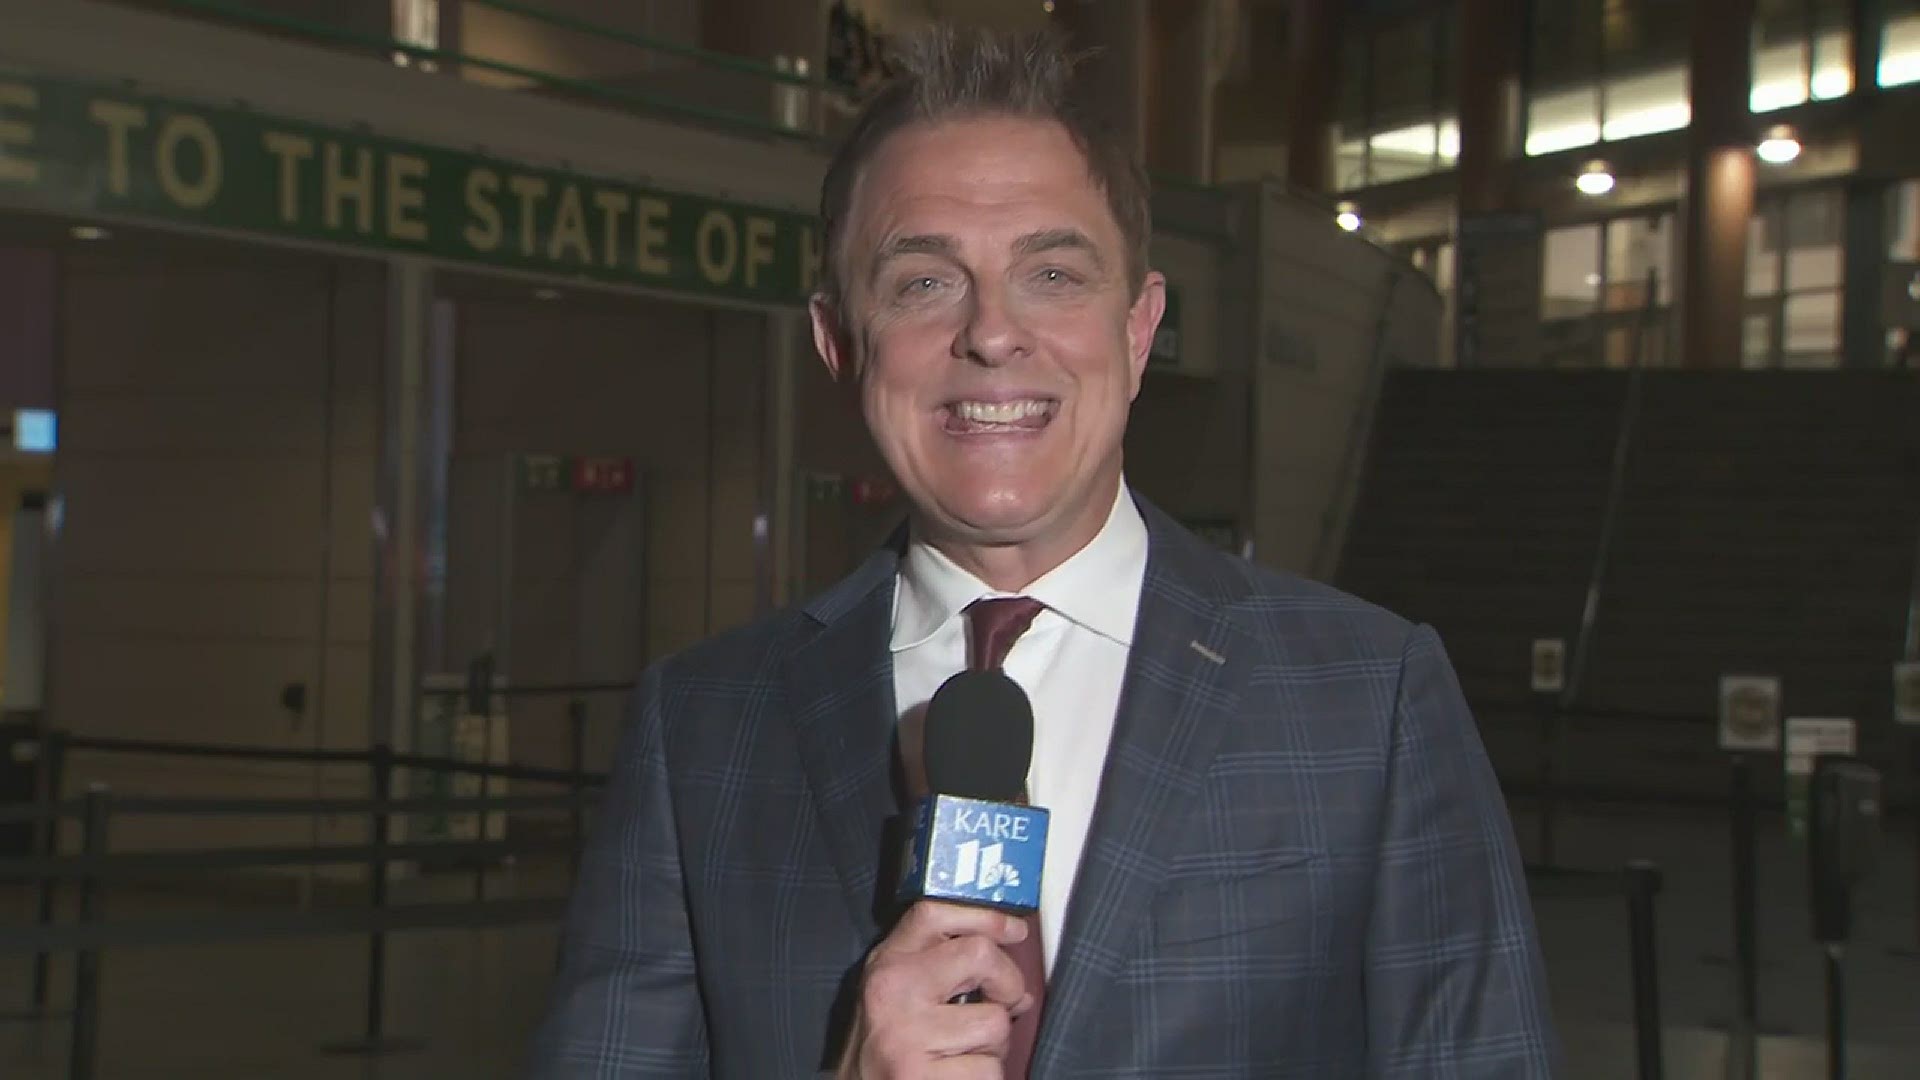 KARE 11 Sports Director Eric Perkins talks about the Minnesota Wild's big win to force a game 7 against the Vegas Golden Knights.